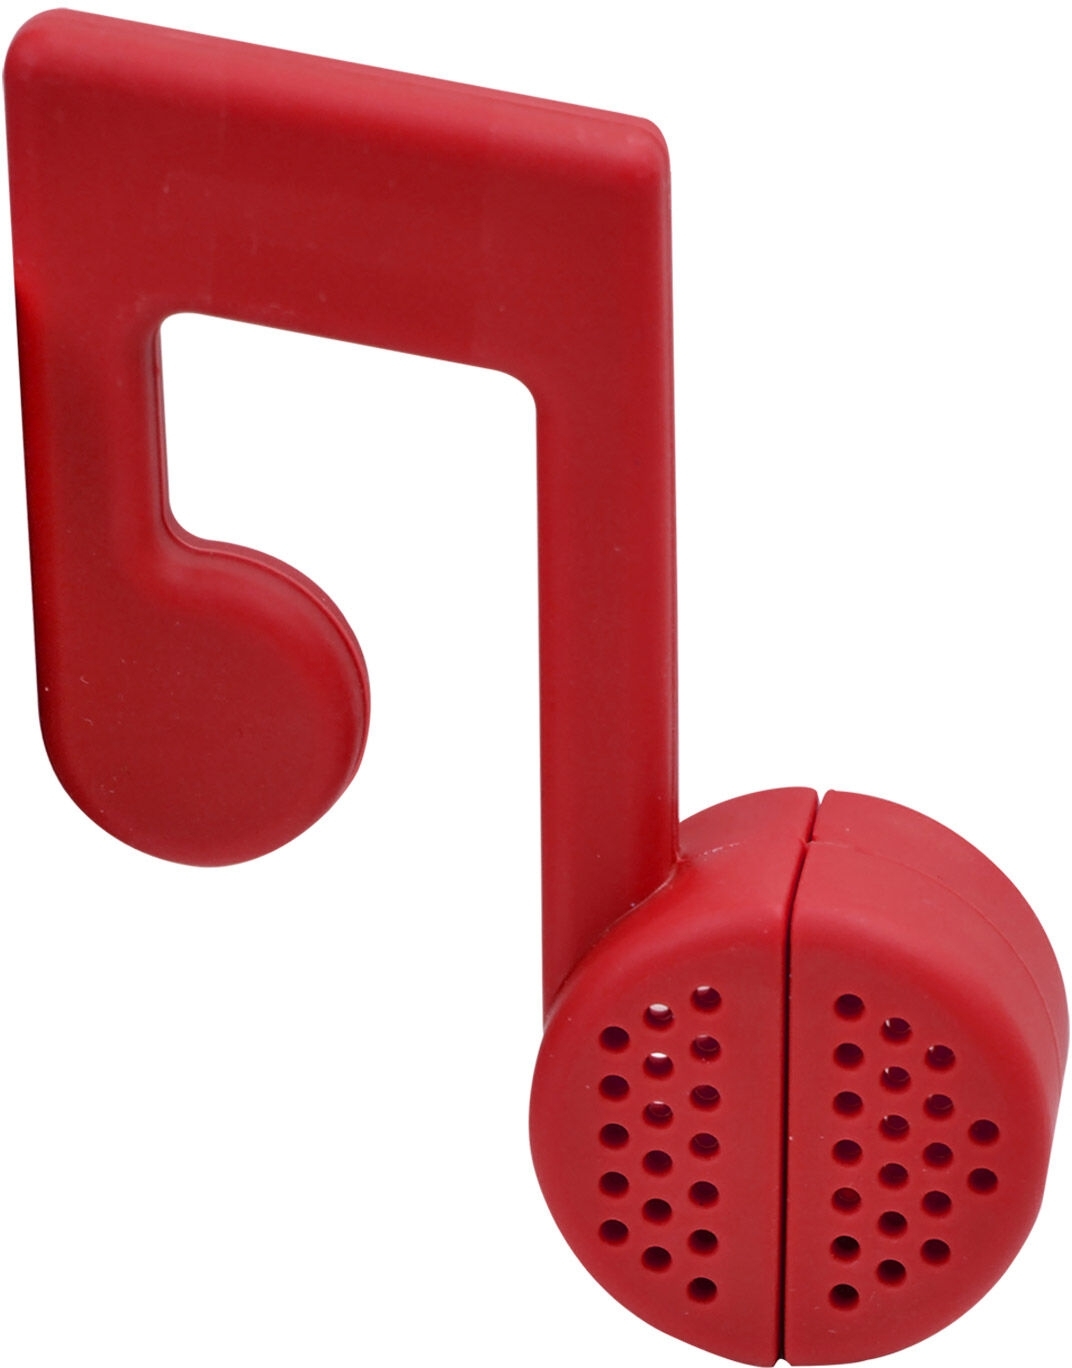 Legami Music note tea infuser - red